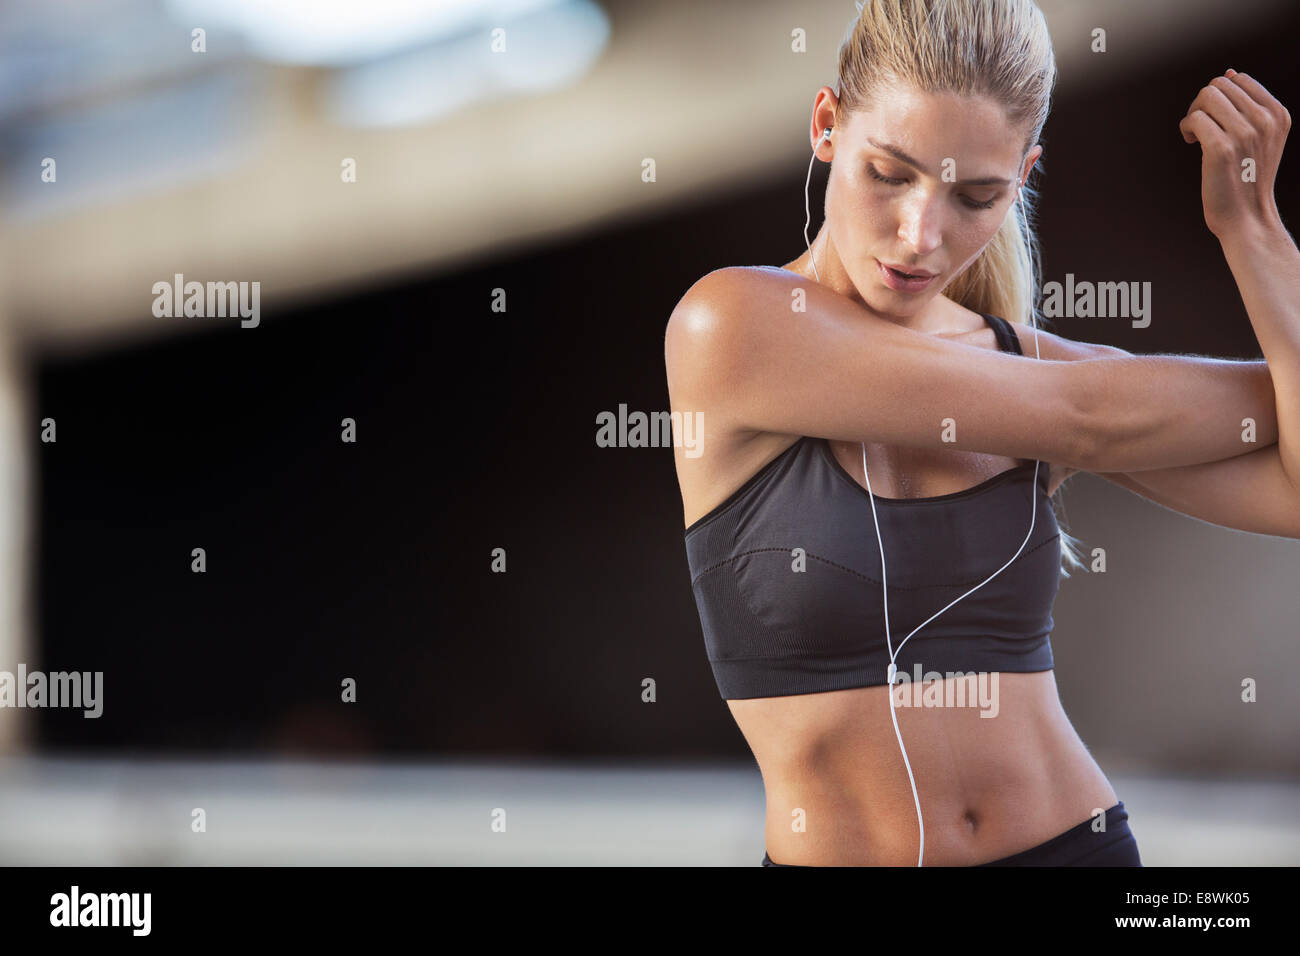 Woman stretching arms before exercise Stock Photo